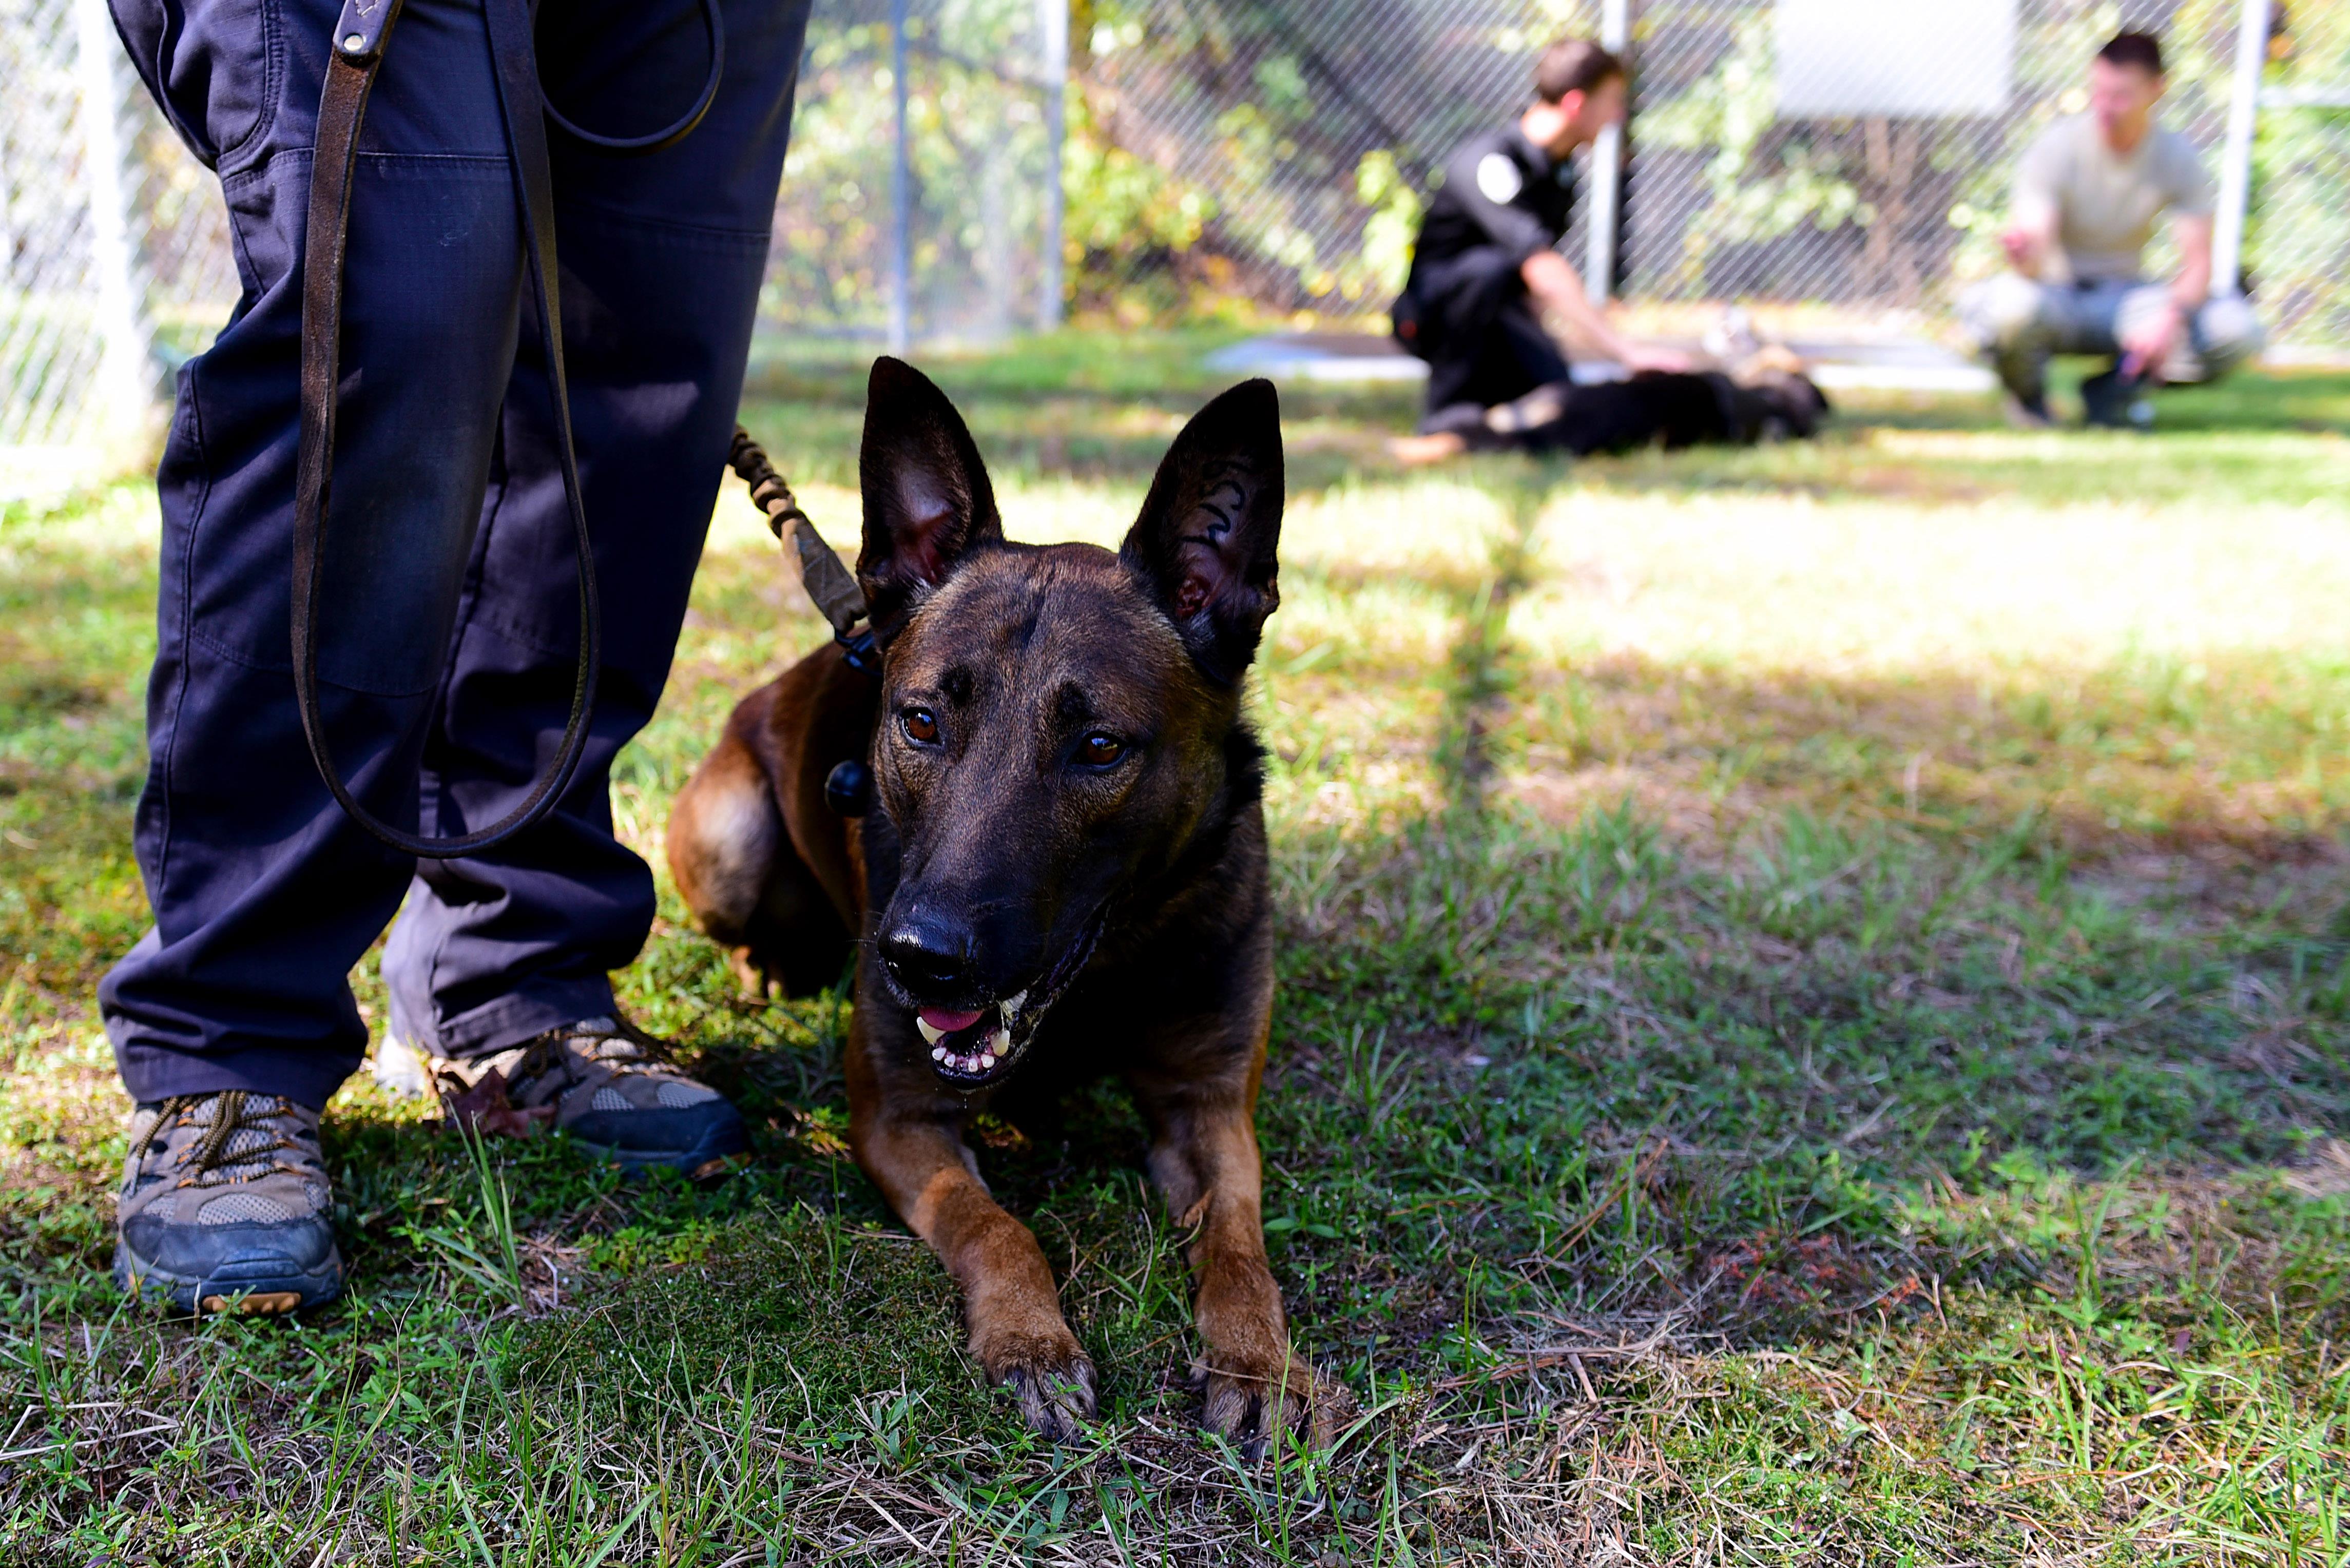 The Next Major Advancement in Police Search Technology: Vapor Wake Dogs